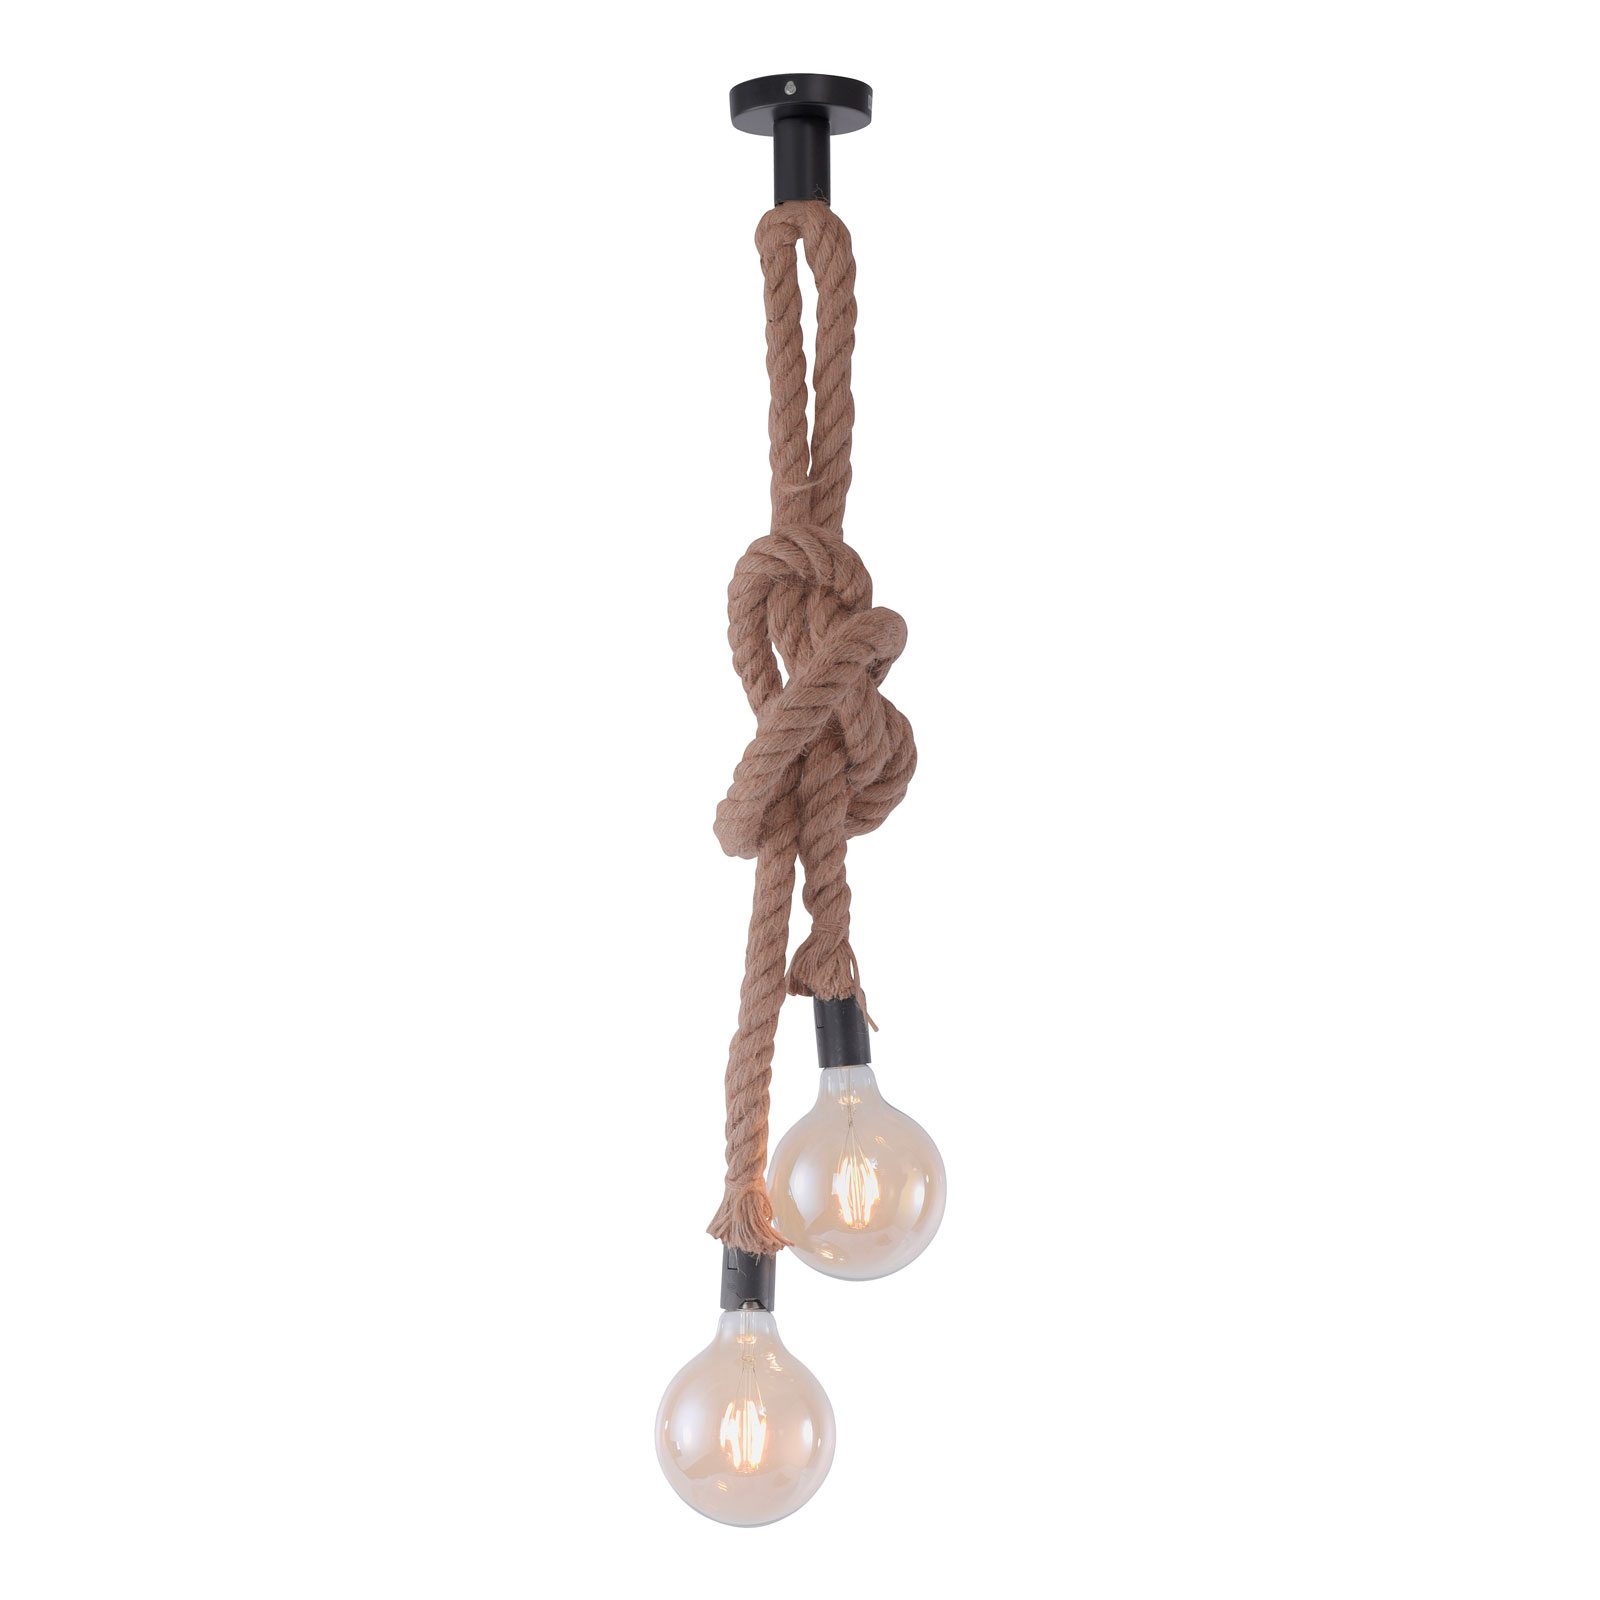 Rope pendant light with rope, two-bulb